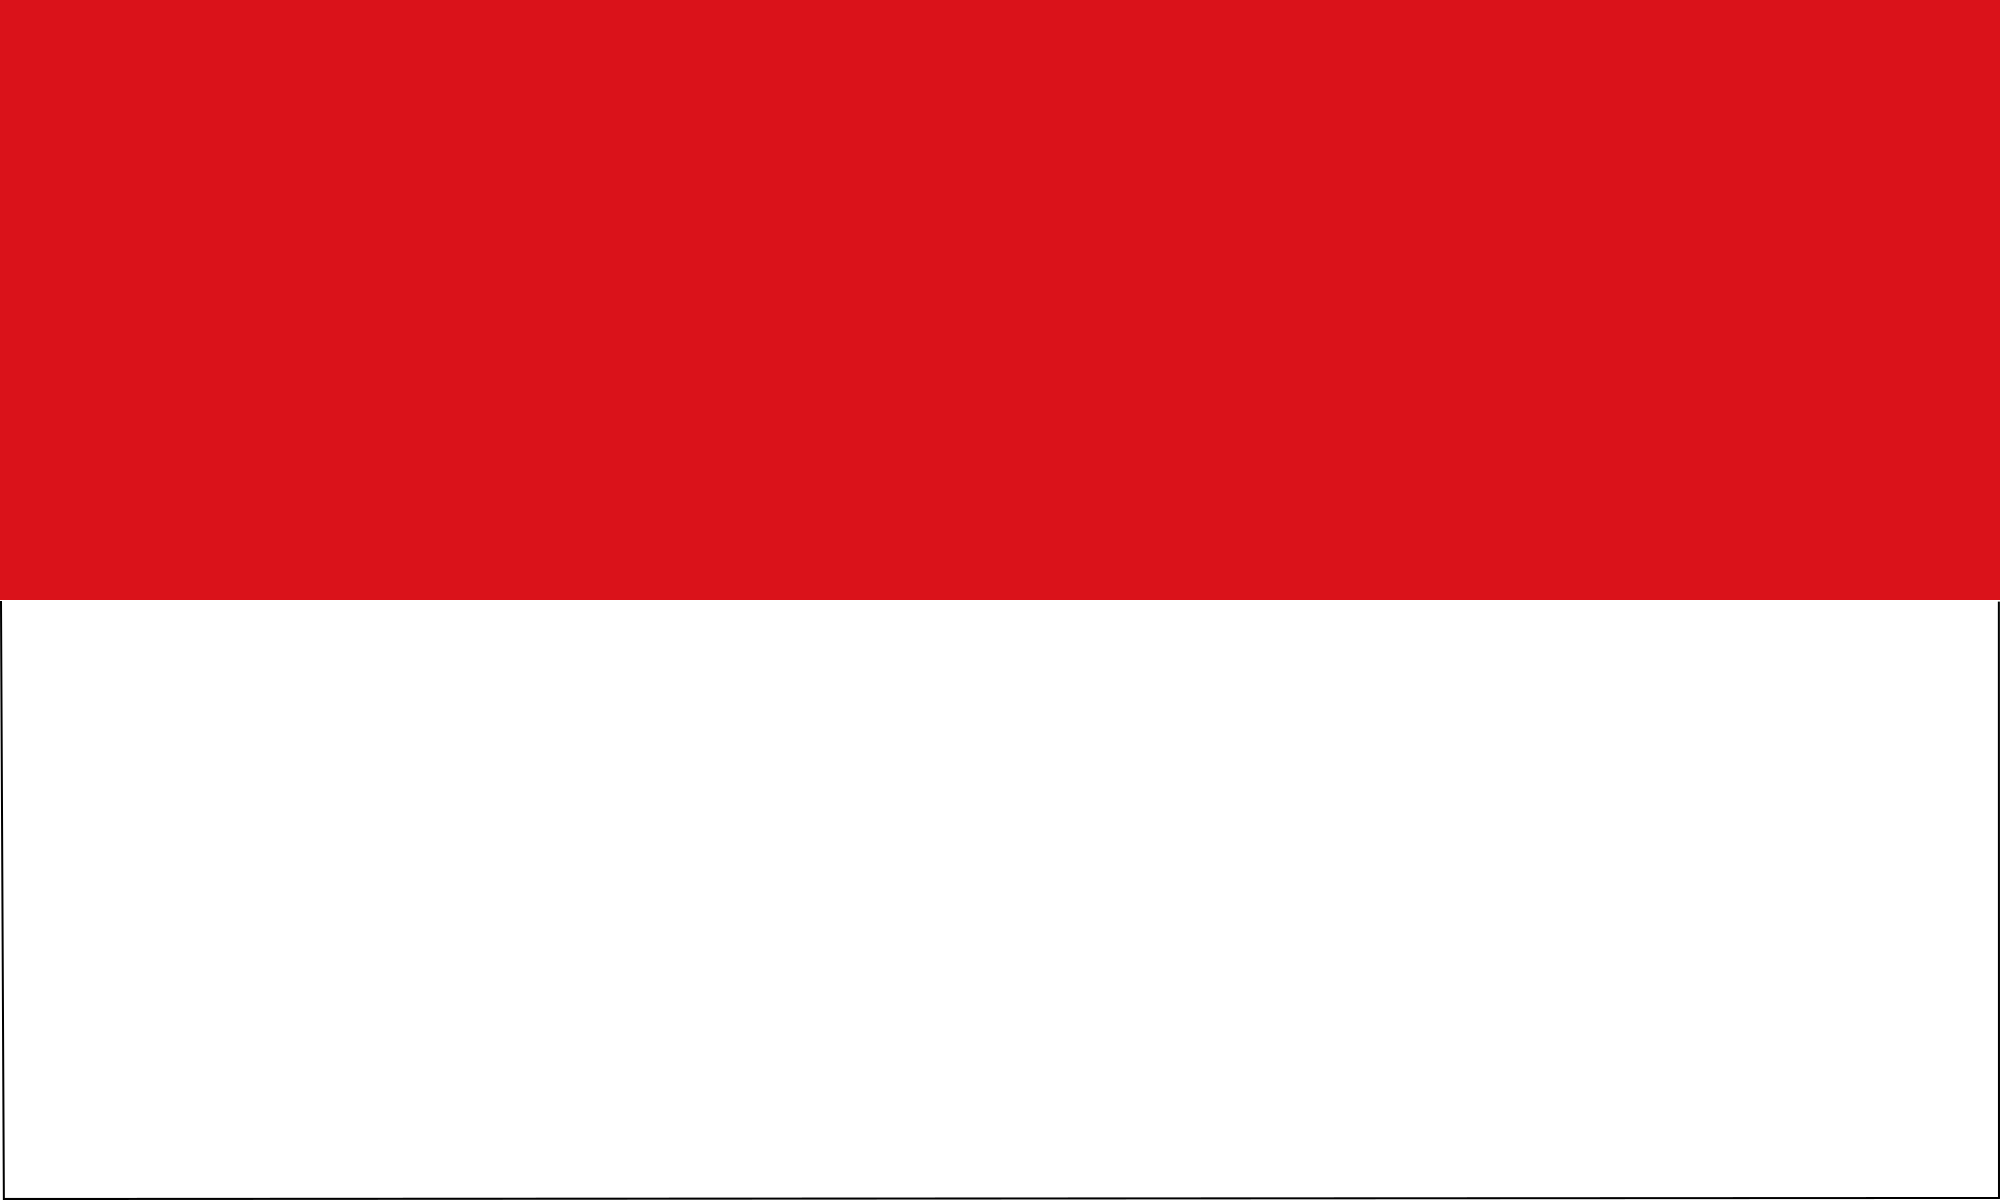 File:Flag red white.svg - Wikimedia Commons